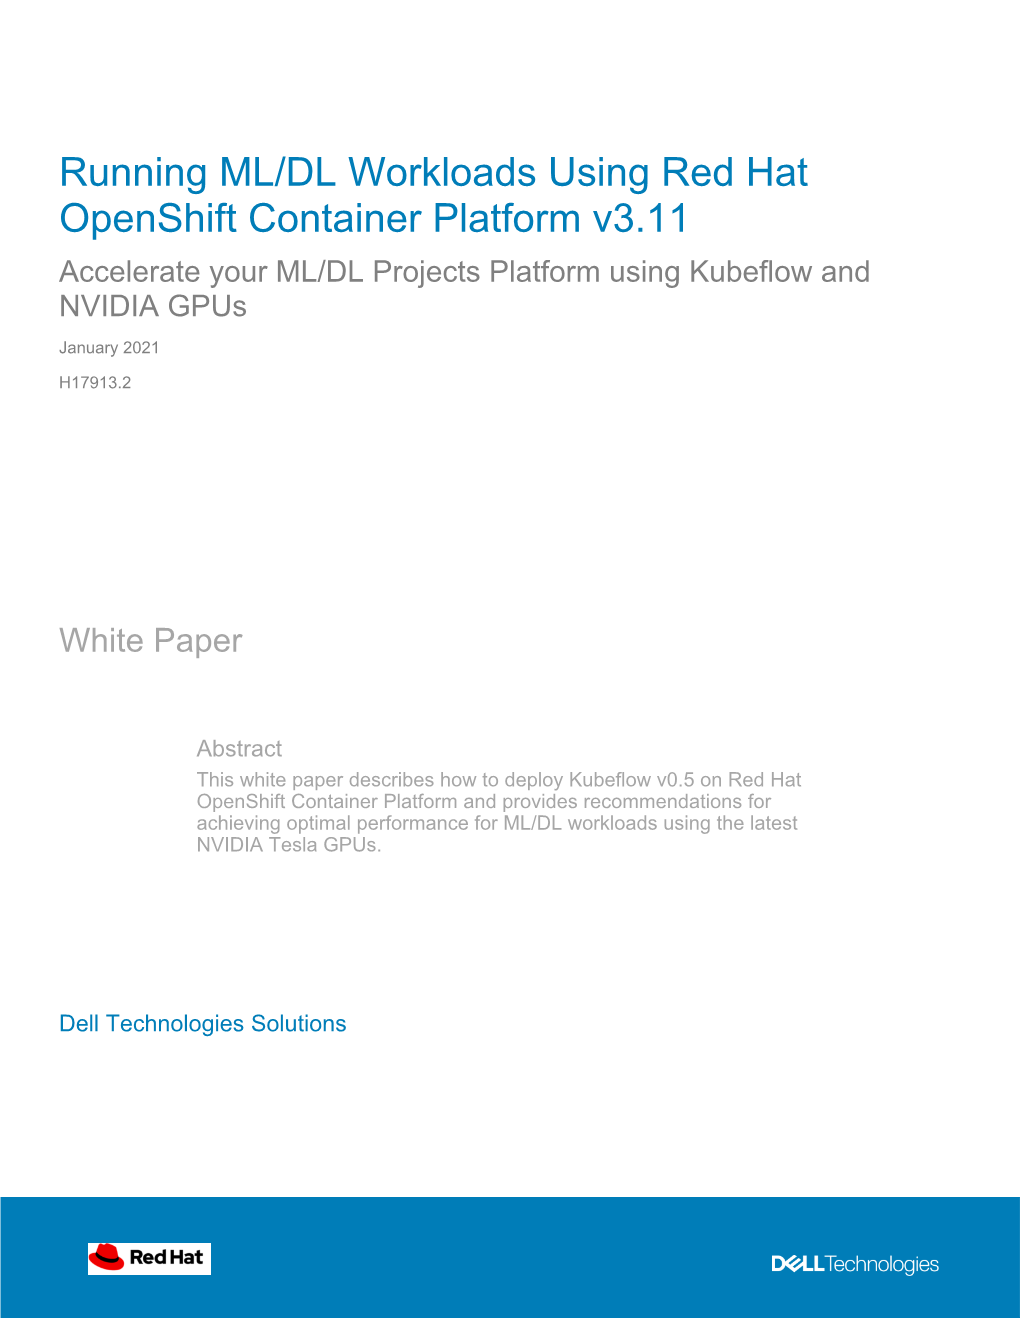 Running ML/DL Workloads Using Red Hat Openshift Container Platform V3.11 Accelerate Your ML/DL Projects Platform Using Kubeflow and NVIDIA Gpus